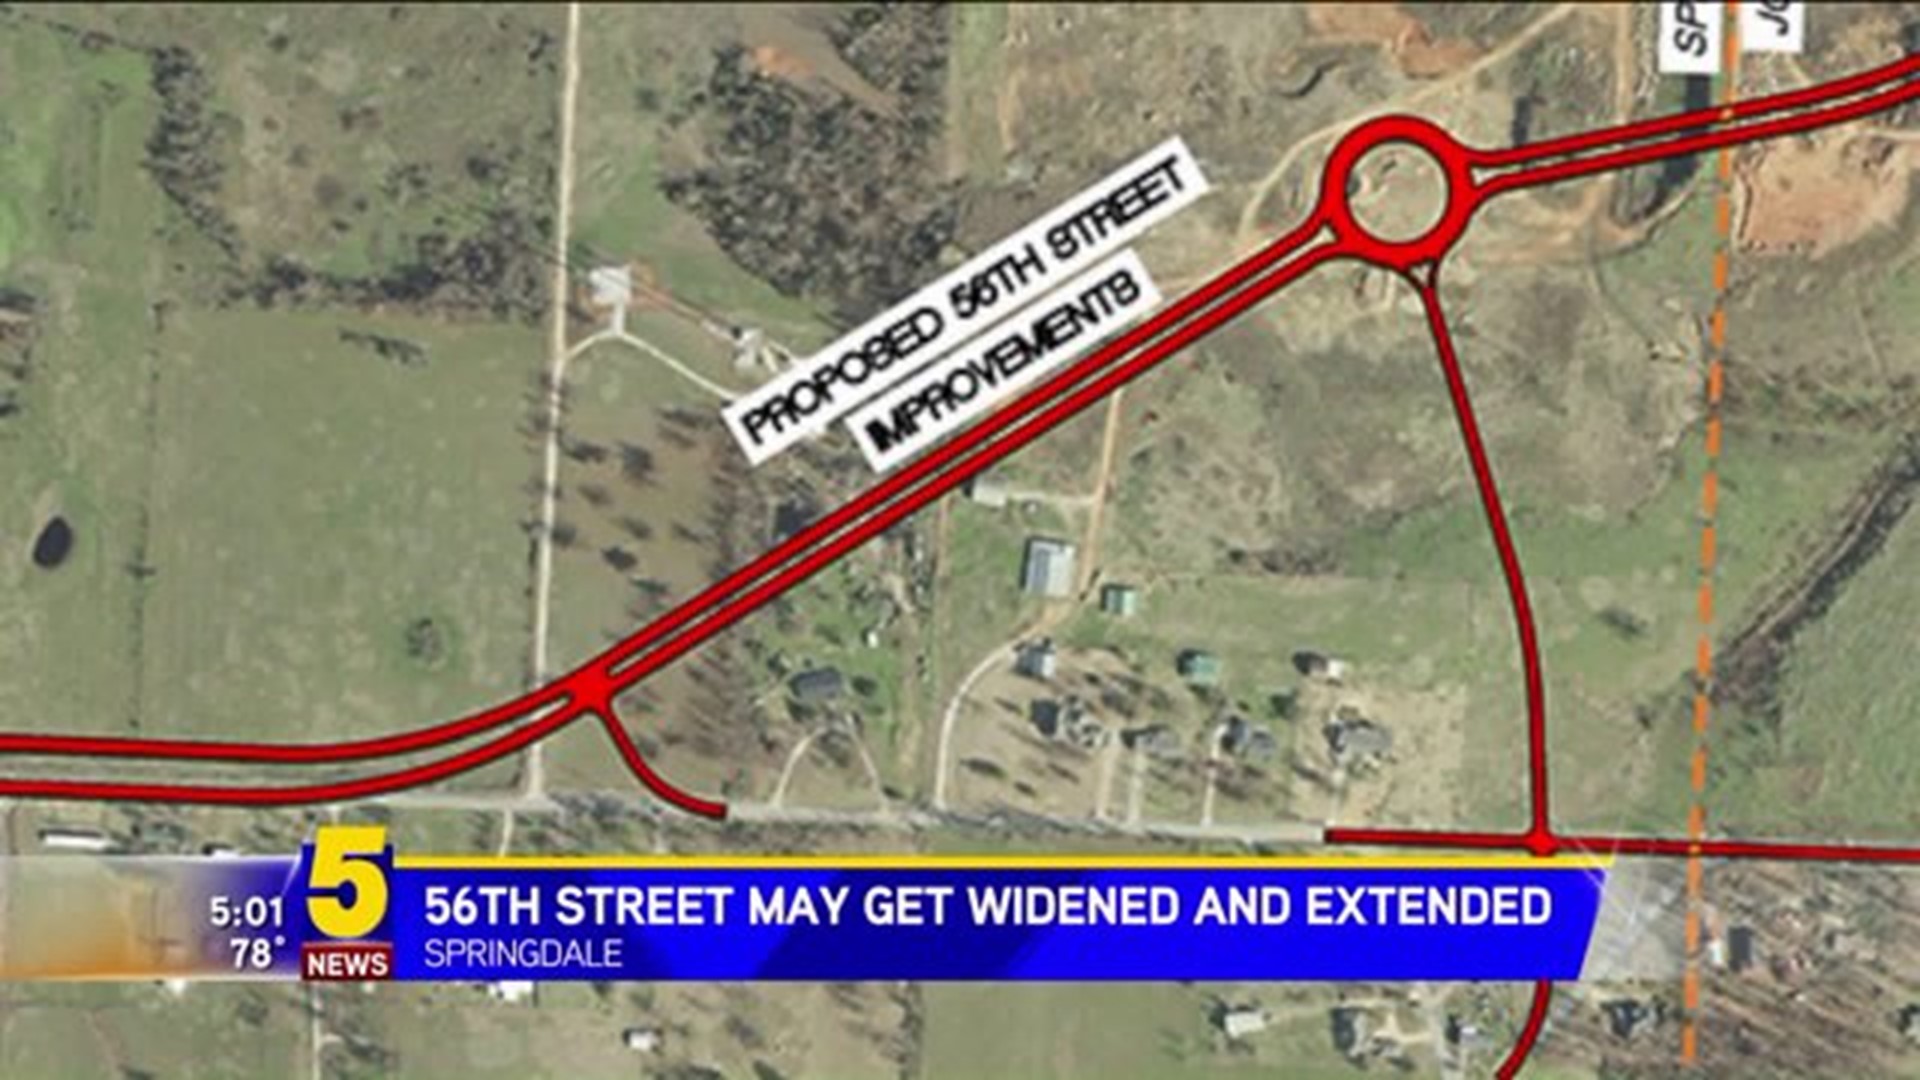 56TH STREET IN SPRINGDALE MAY GET WIDENED AND EXTENDED